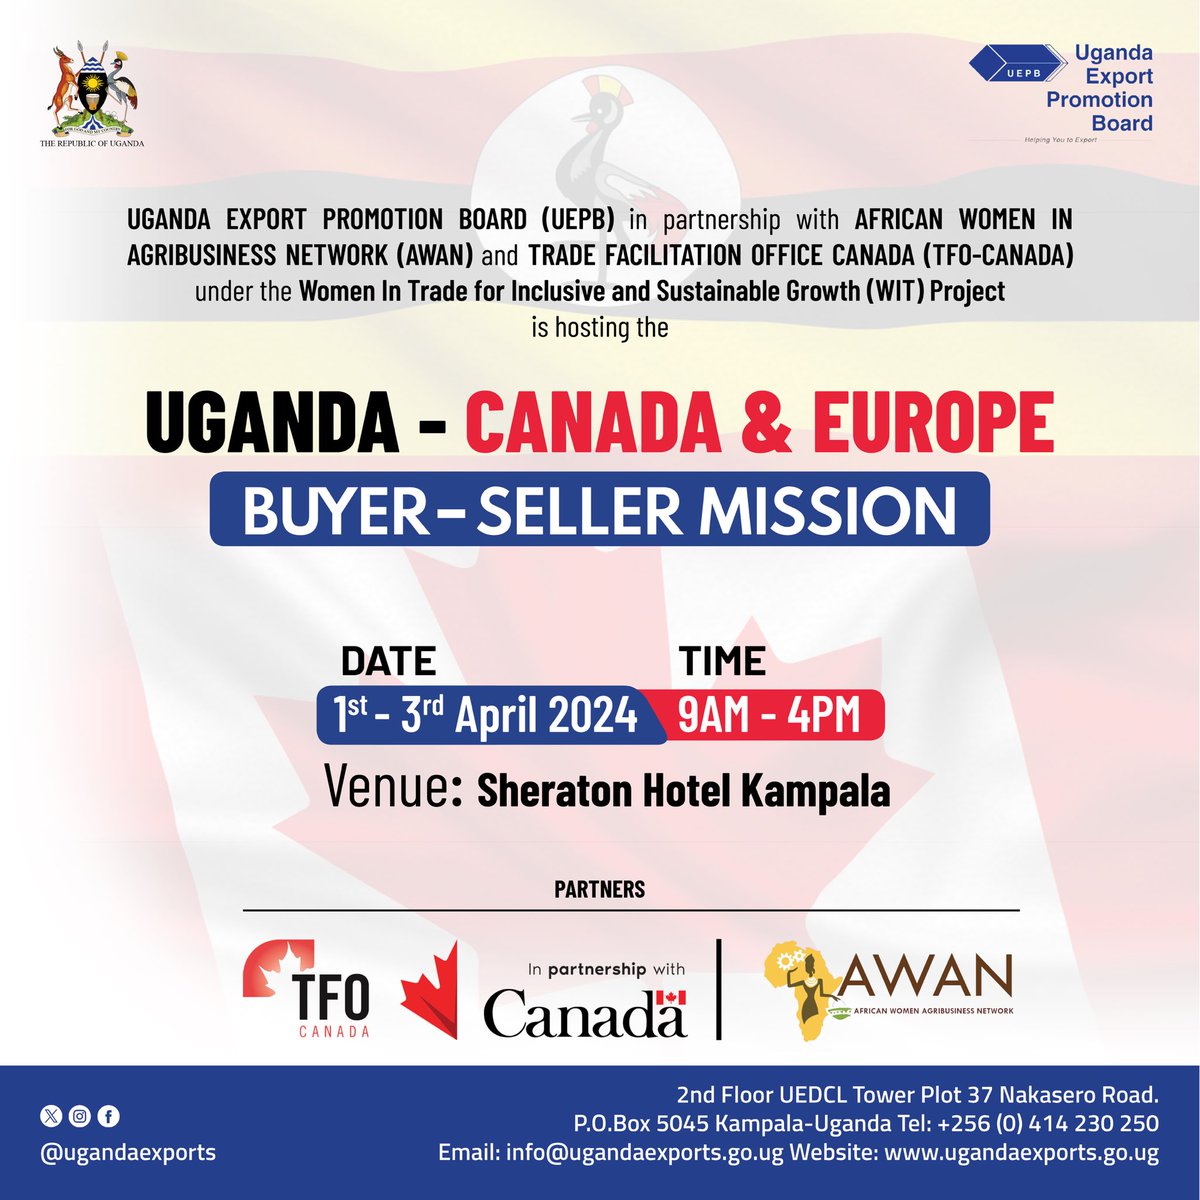 We shall be hosting the Uganda - Canada & Europe Buyerseller Mission from 1st- 3rd April 2024 at Sheraton hotel Kampala 
Don’t miss!! 
#AnugaSuccessStories